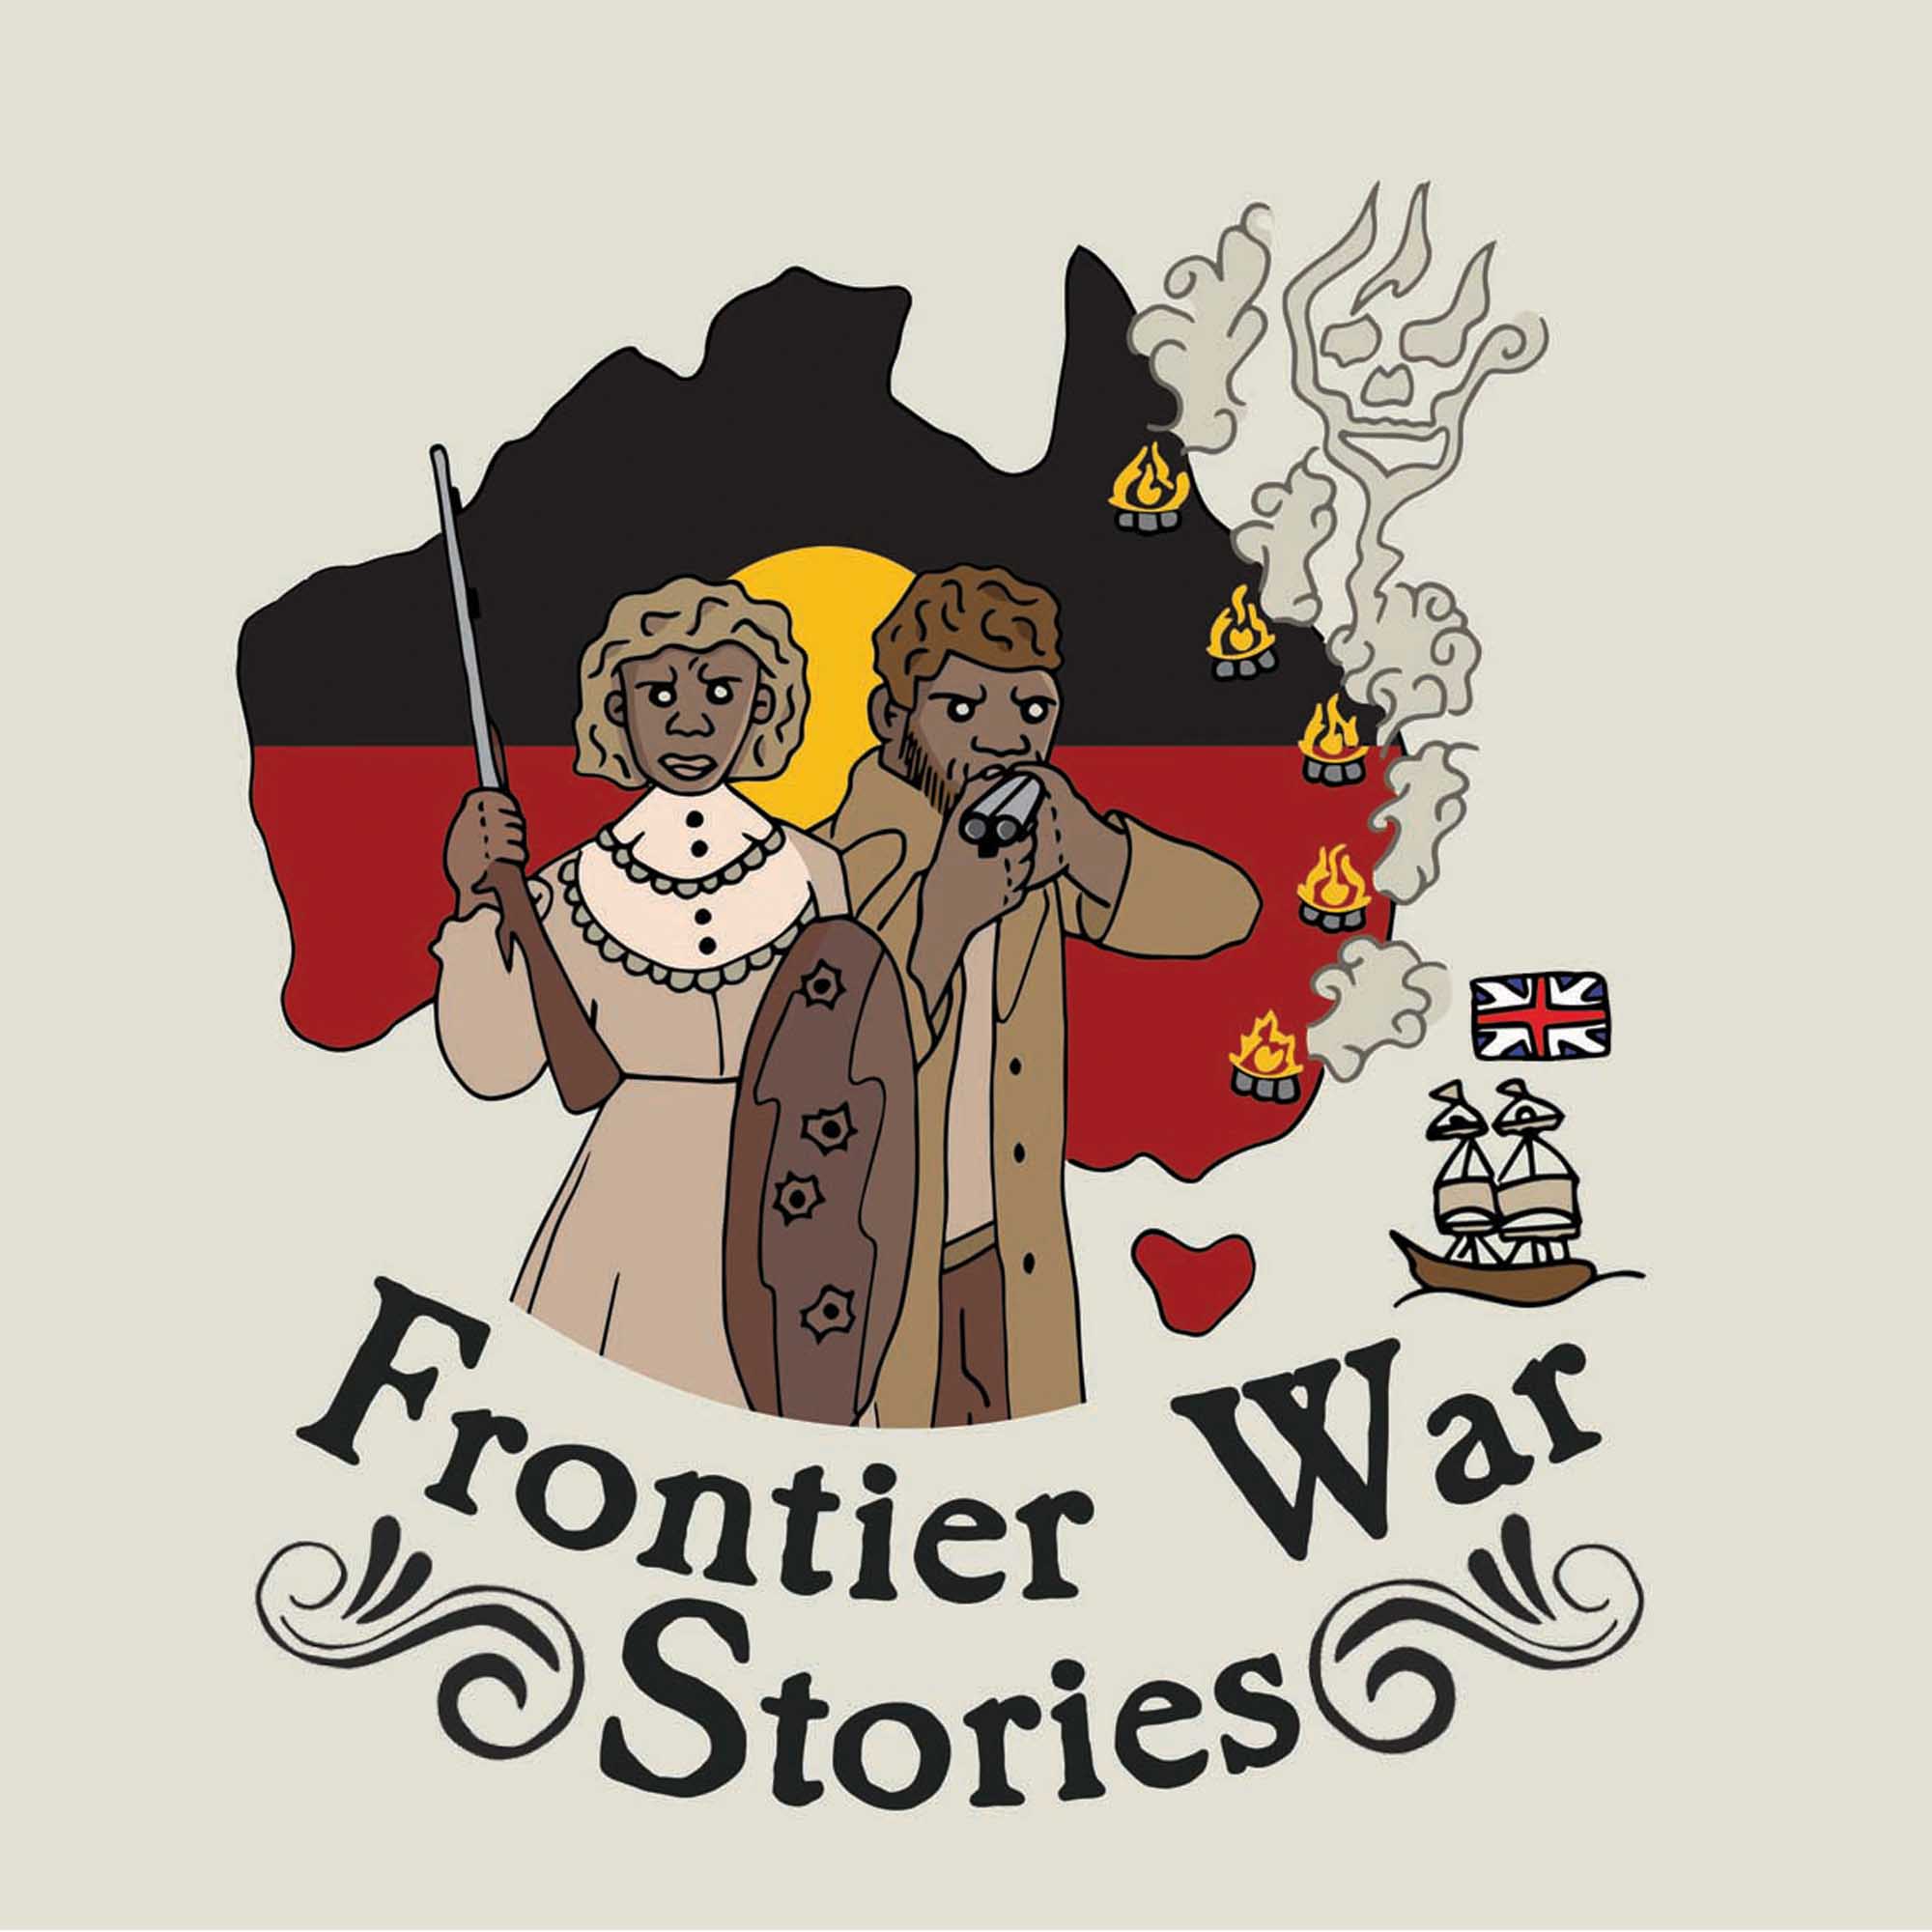 Frontier War Stories image featuring map of Australia in Indigenous colors with male and female figures in front.